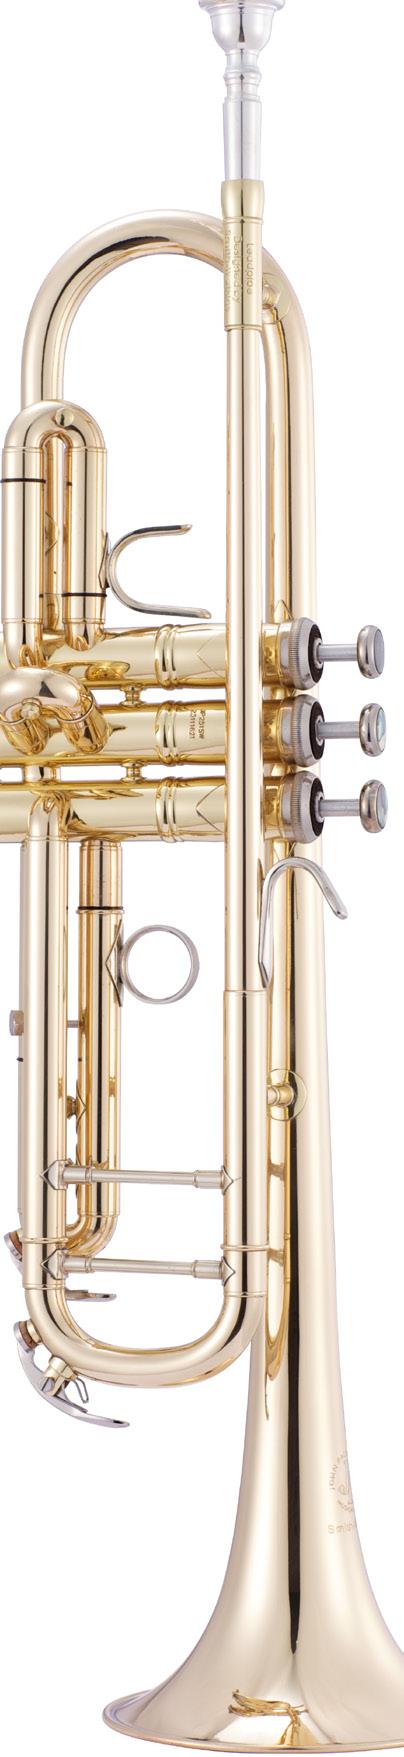 B b Trumpets JP051 B b Trumpet This student trumpet has fast become one of the main stays of trumpet tuition in the UK education system and beyond.